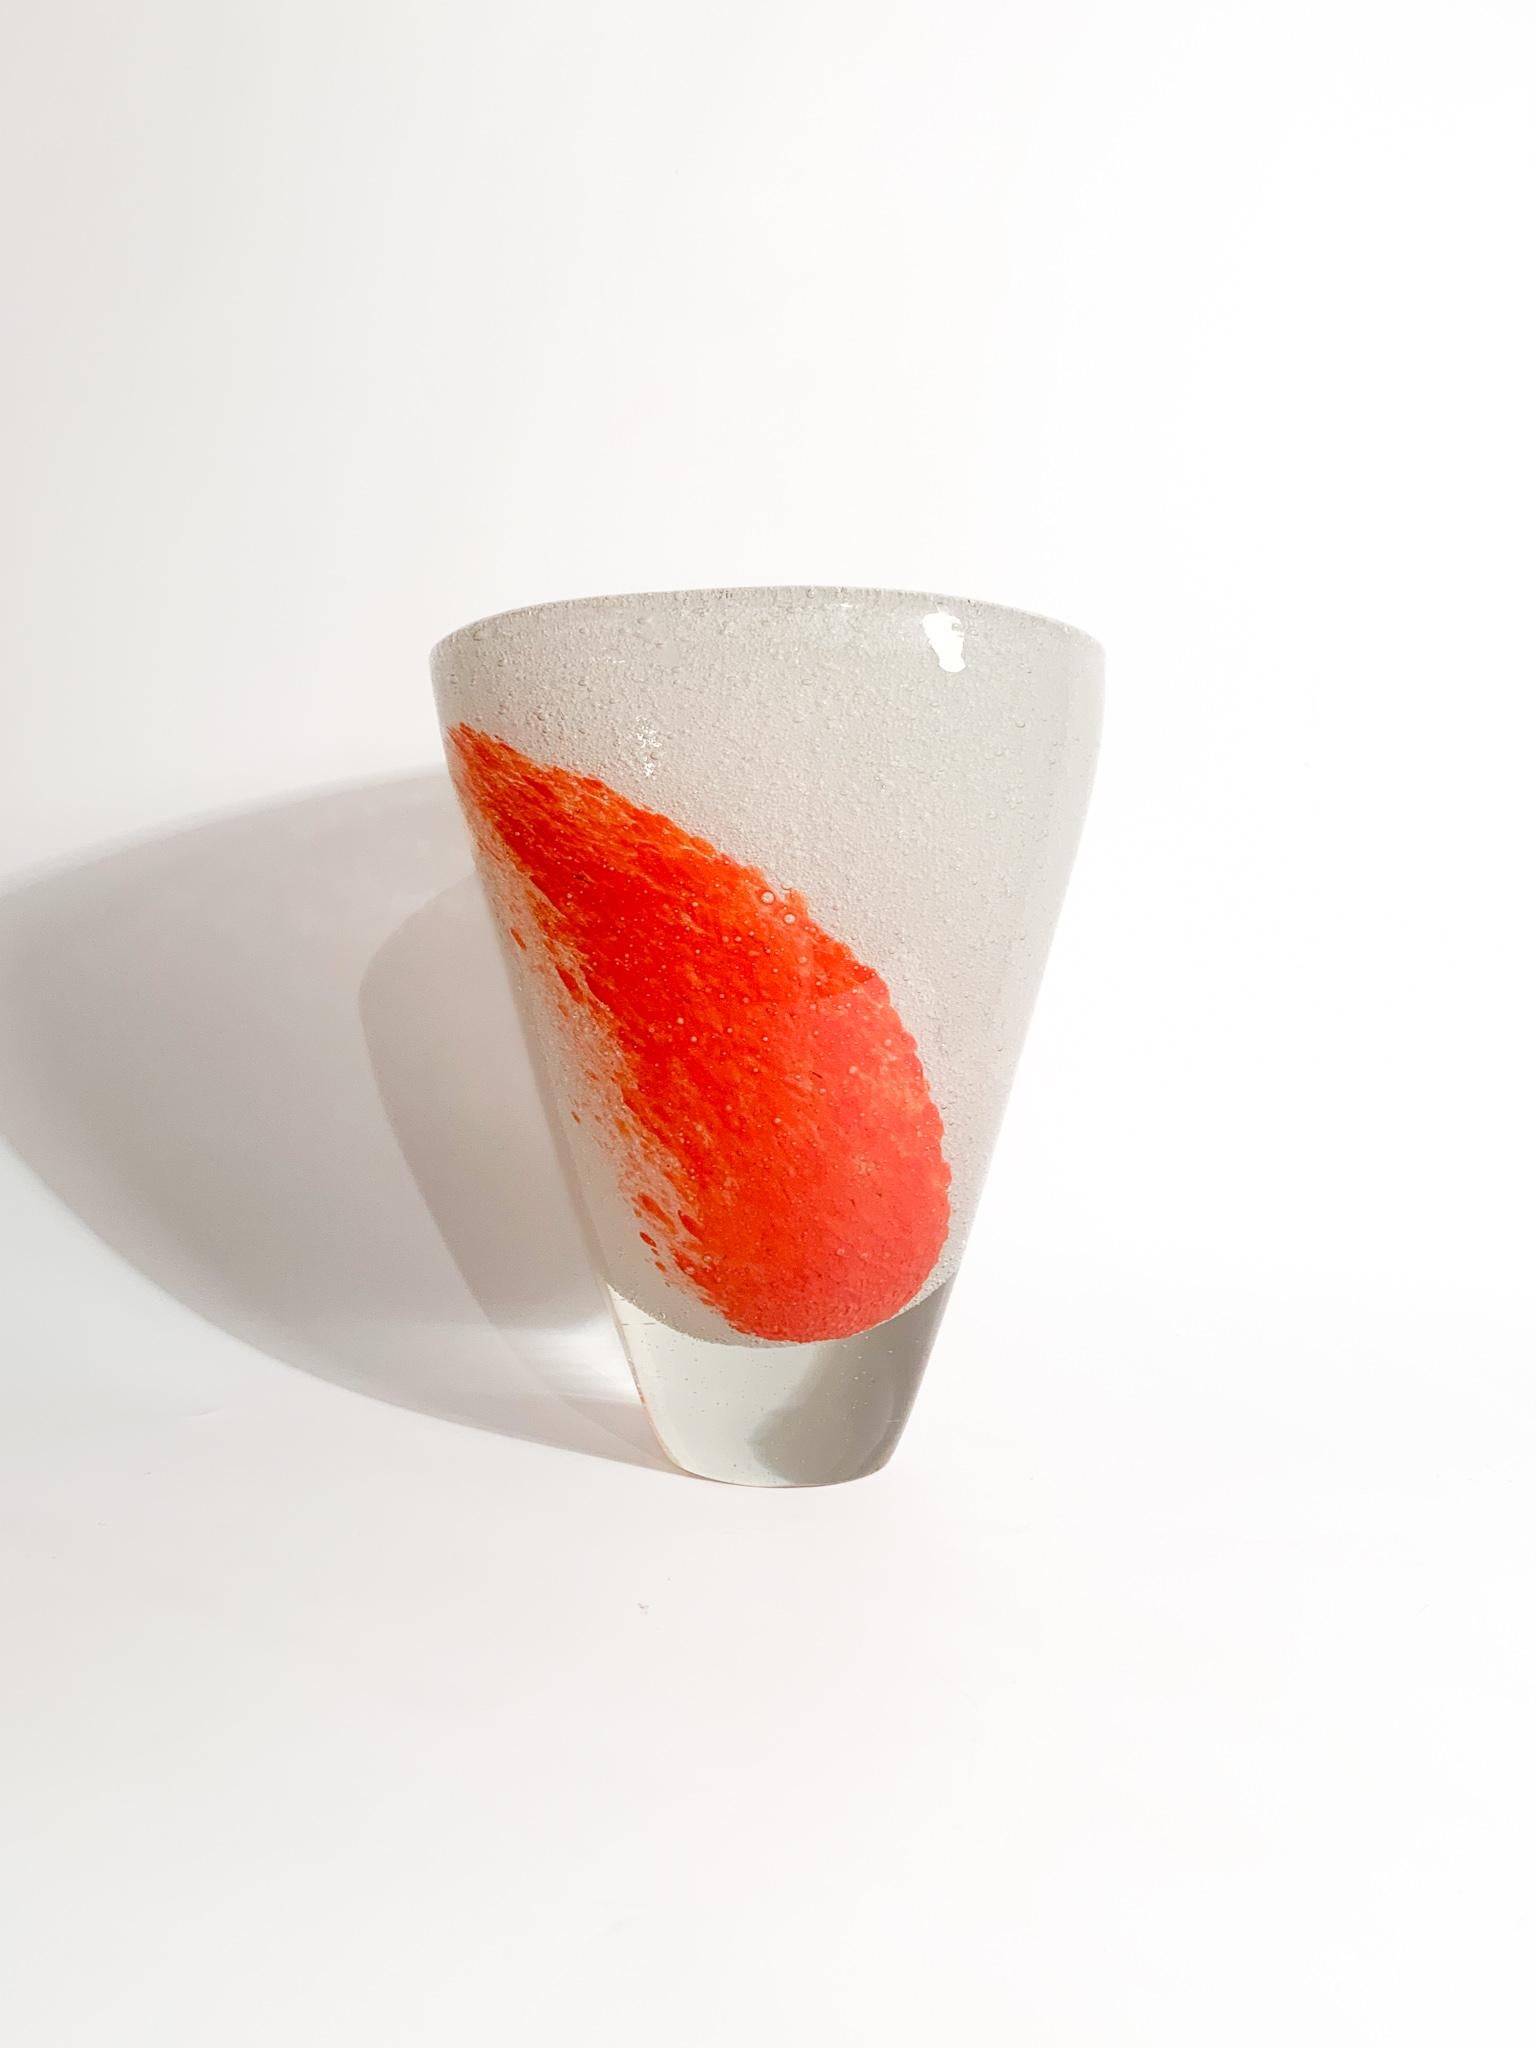 White and orange Murano glass vase, made with the submerged glass technique in the 1980s

Ø cm 16 Ø cm 11 h cm 20

The vase is elliptical in shape, made with the submerged glass technique, thus overlapping different layers of solid glass during hand